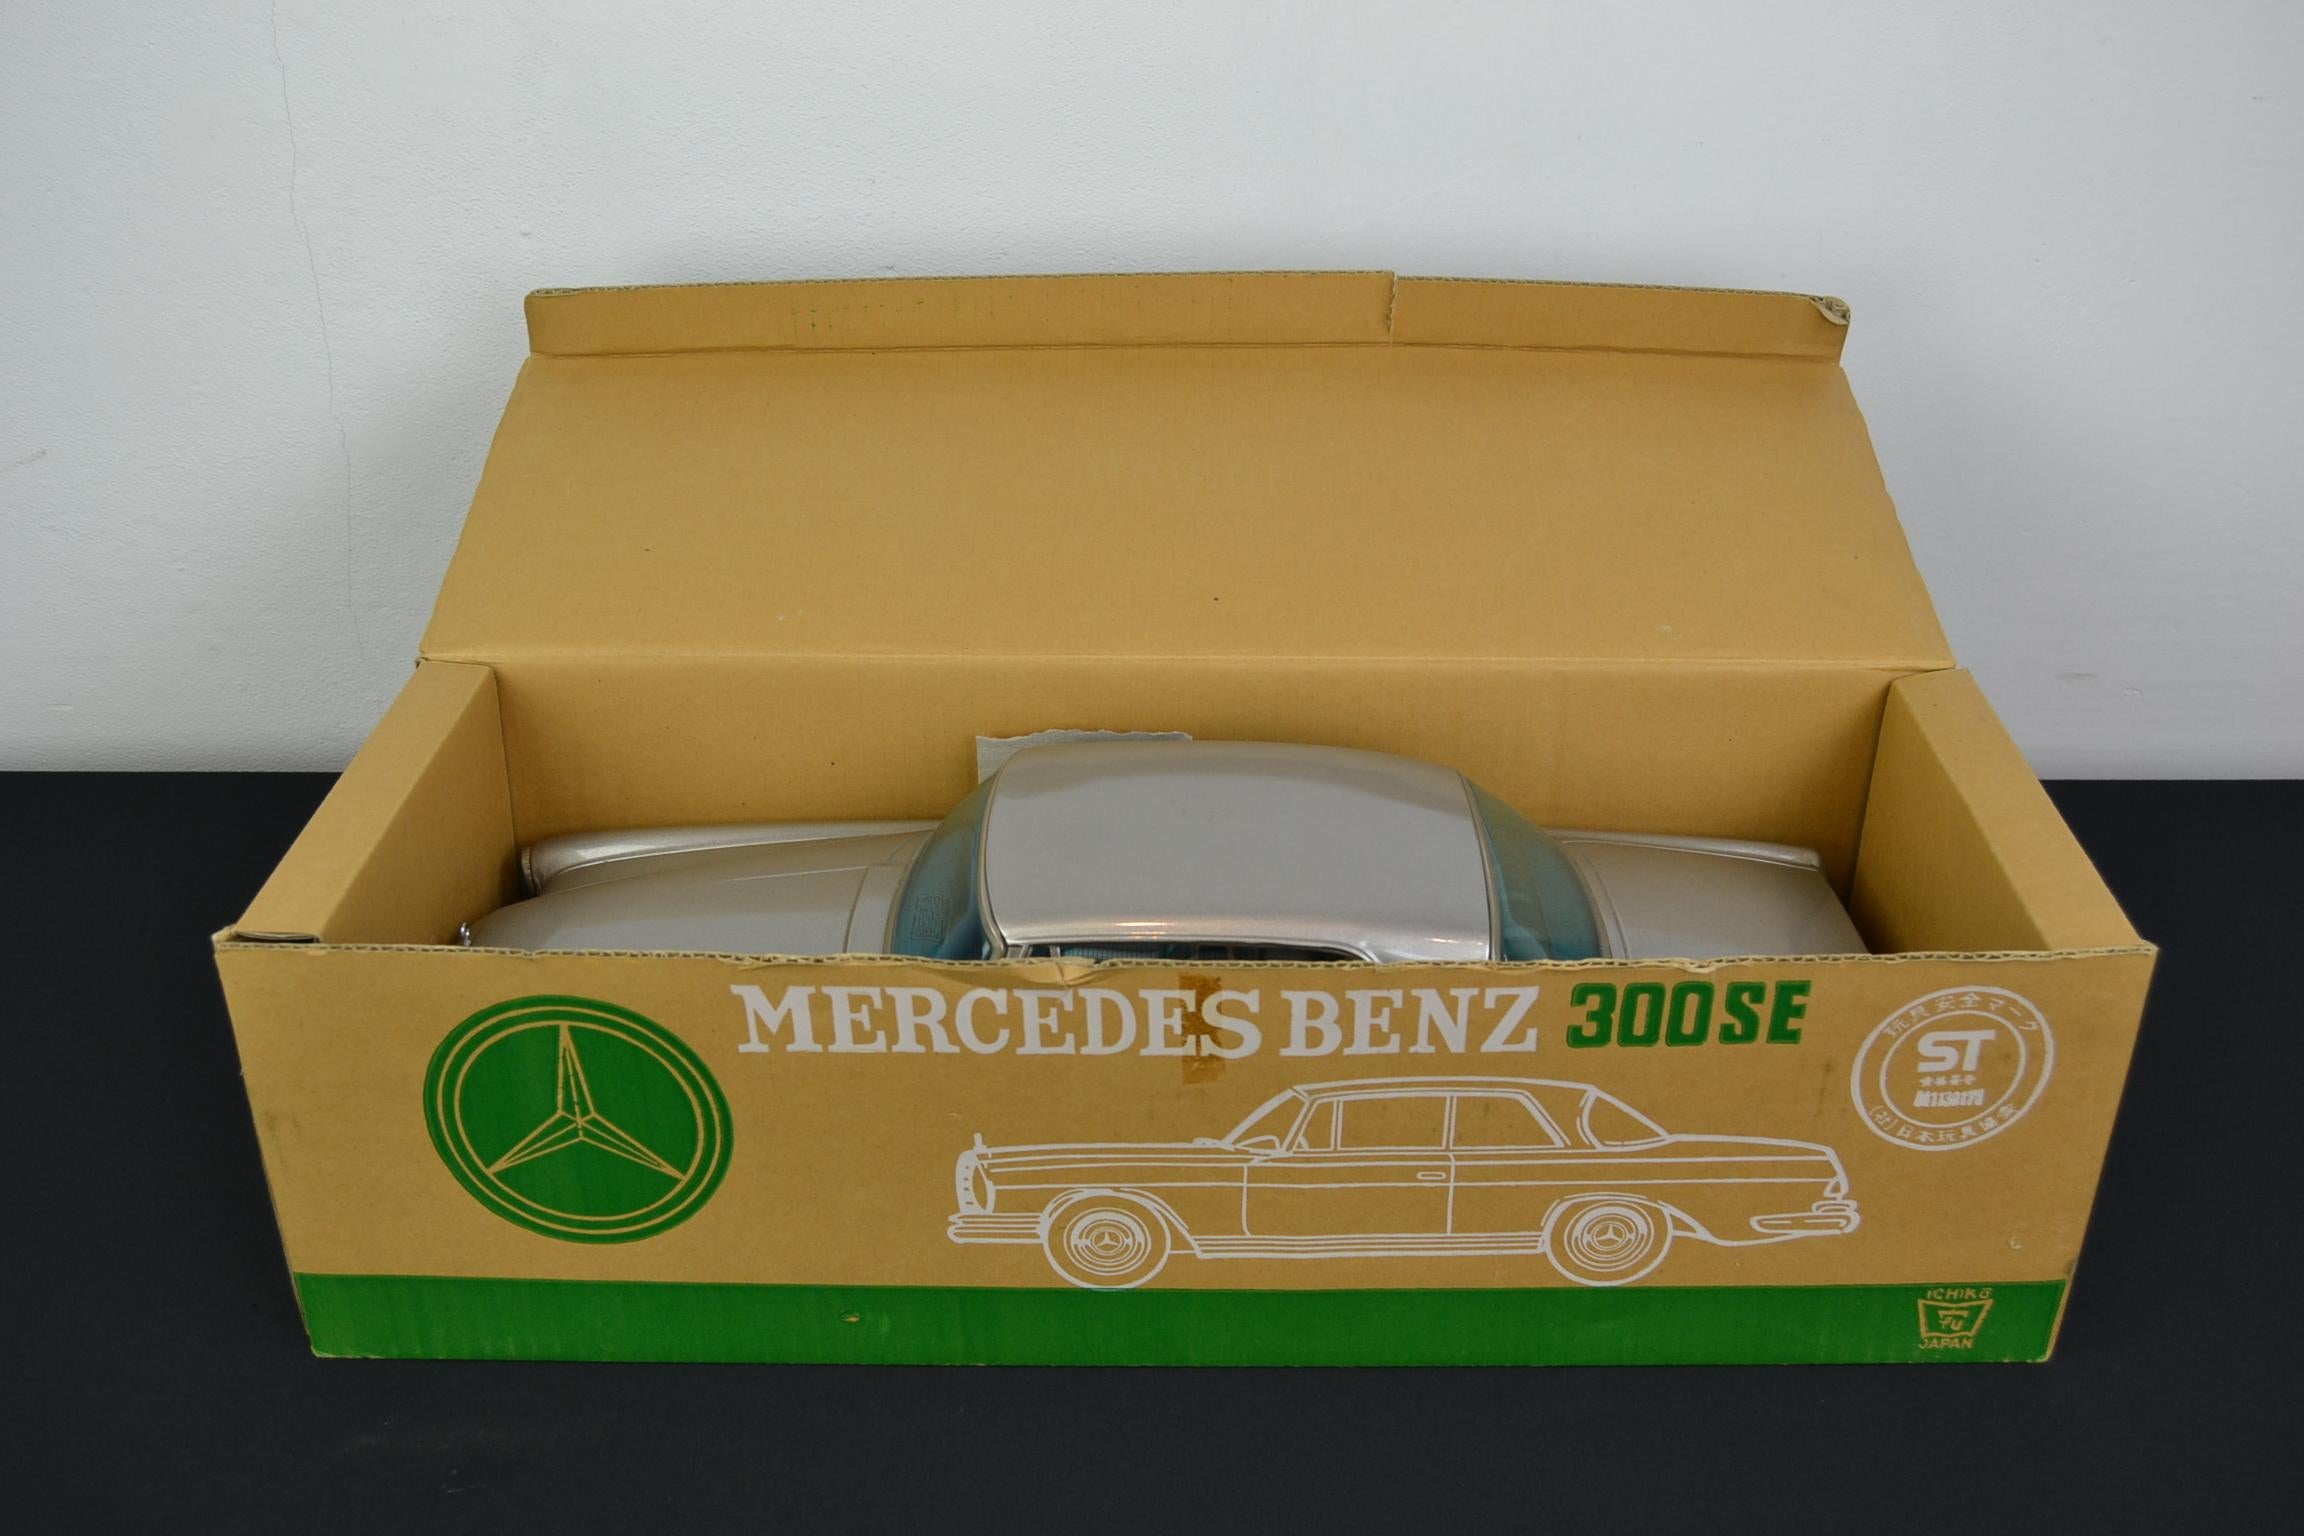 Japanese Boxed Mercedes Benz 300 SE Toy Model by Ichiko Japan, 1980s